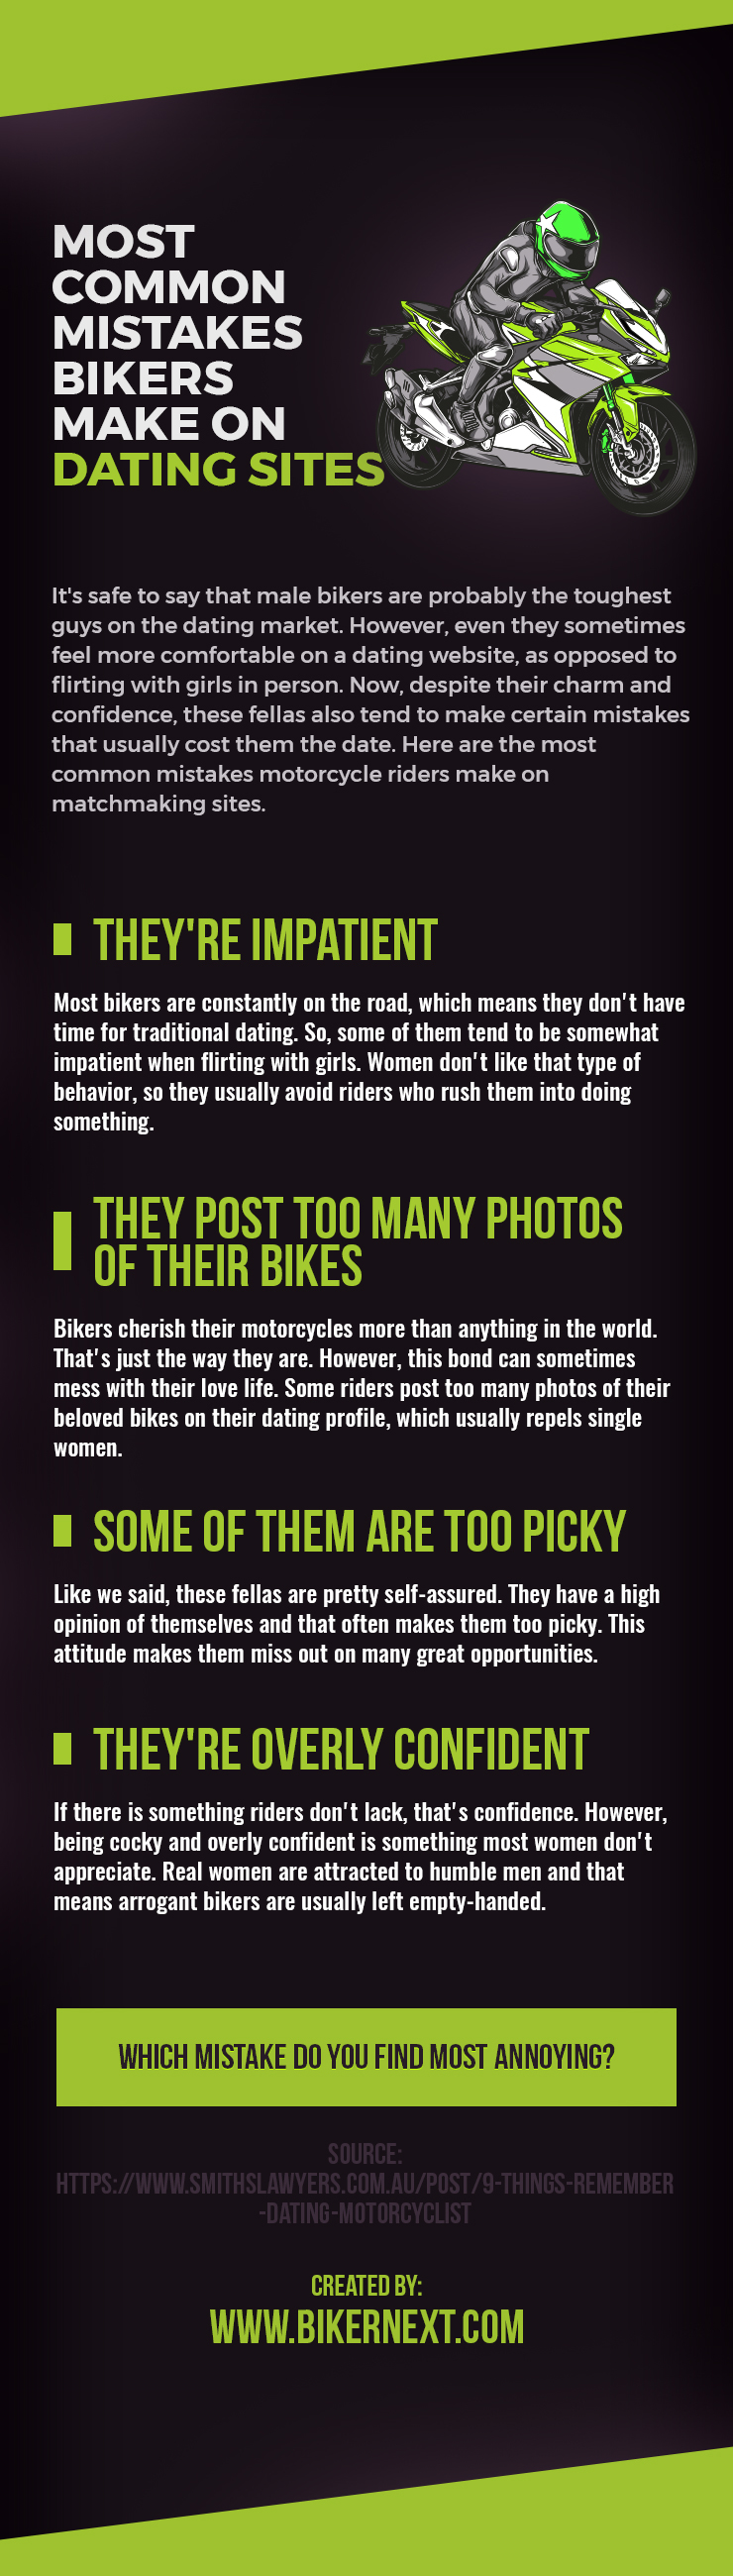 Most Common Mistakes Bikers Make On Dating Sites